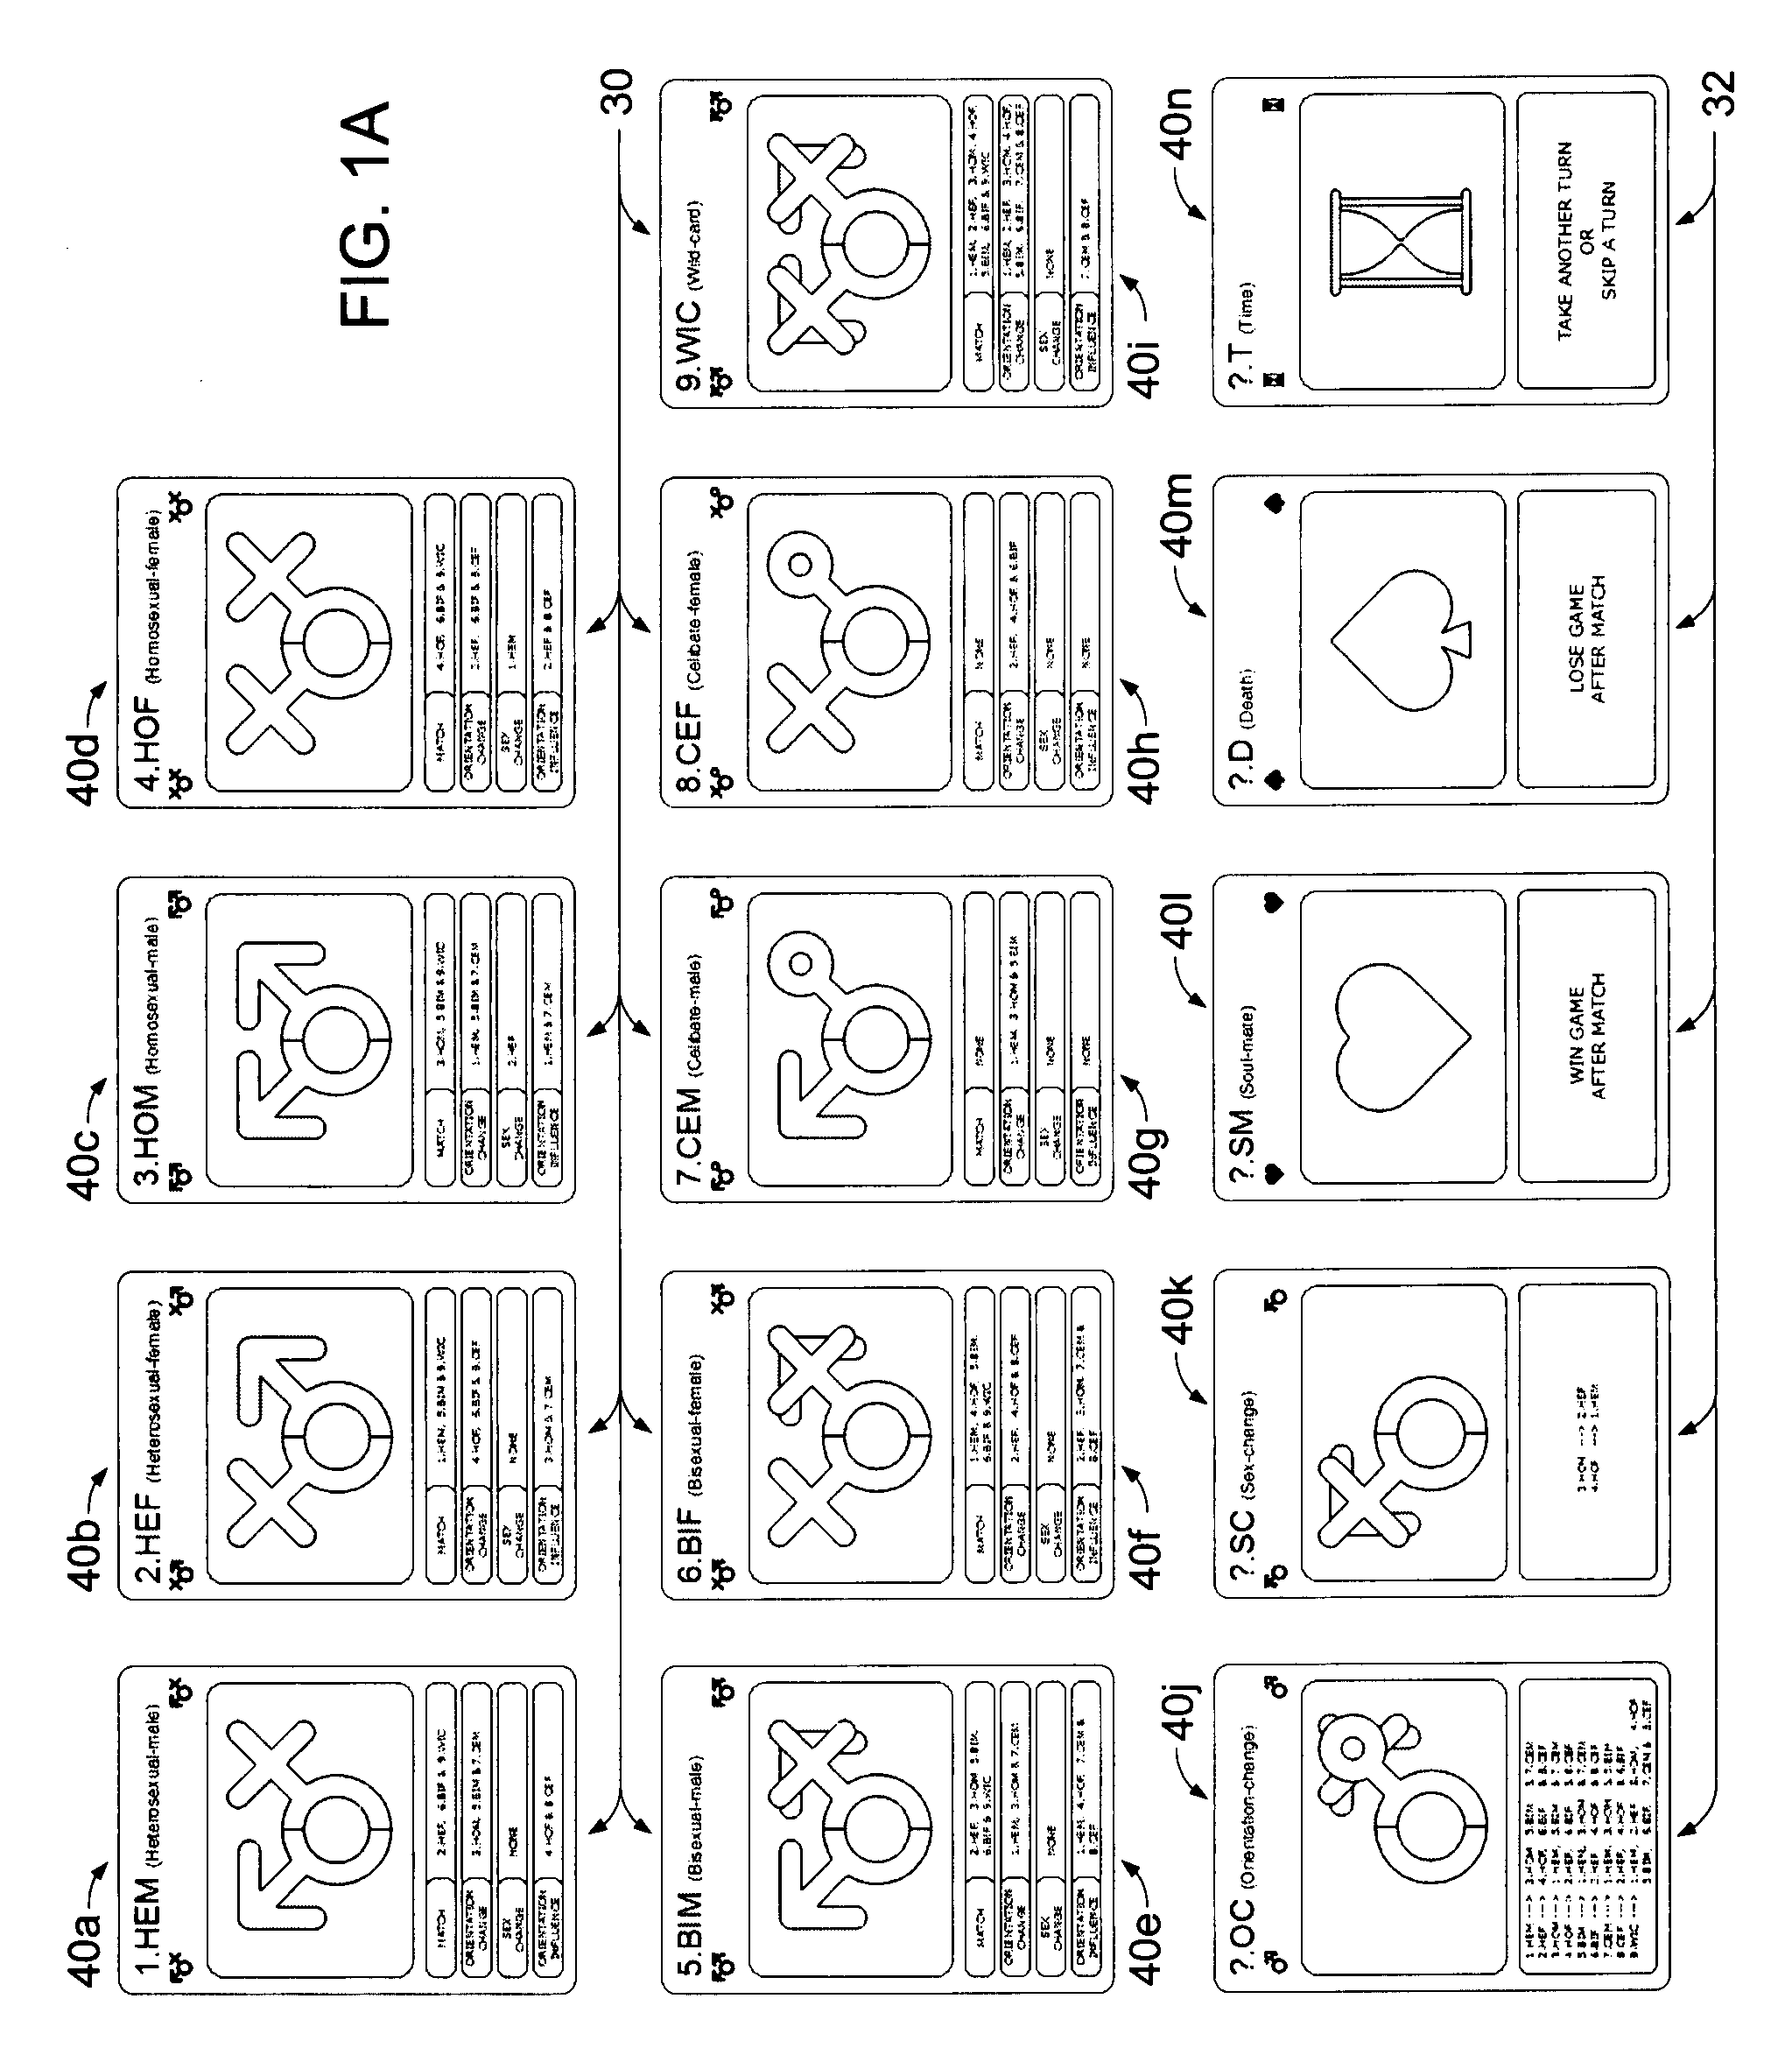 Matching card game and method of playing